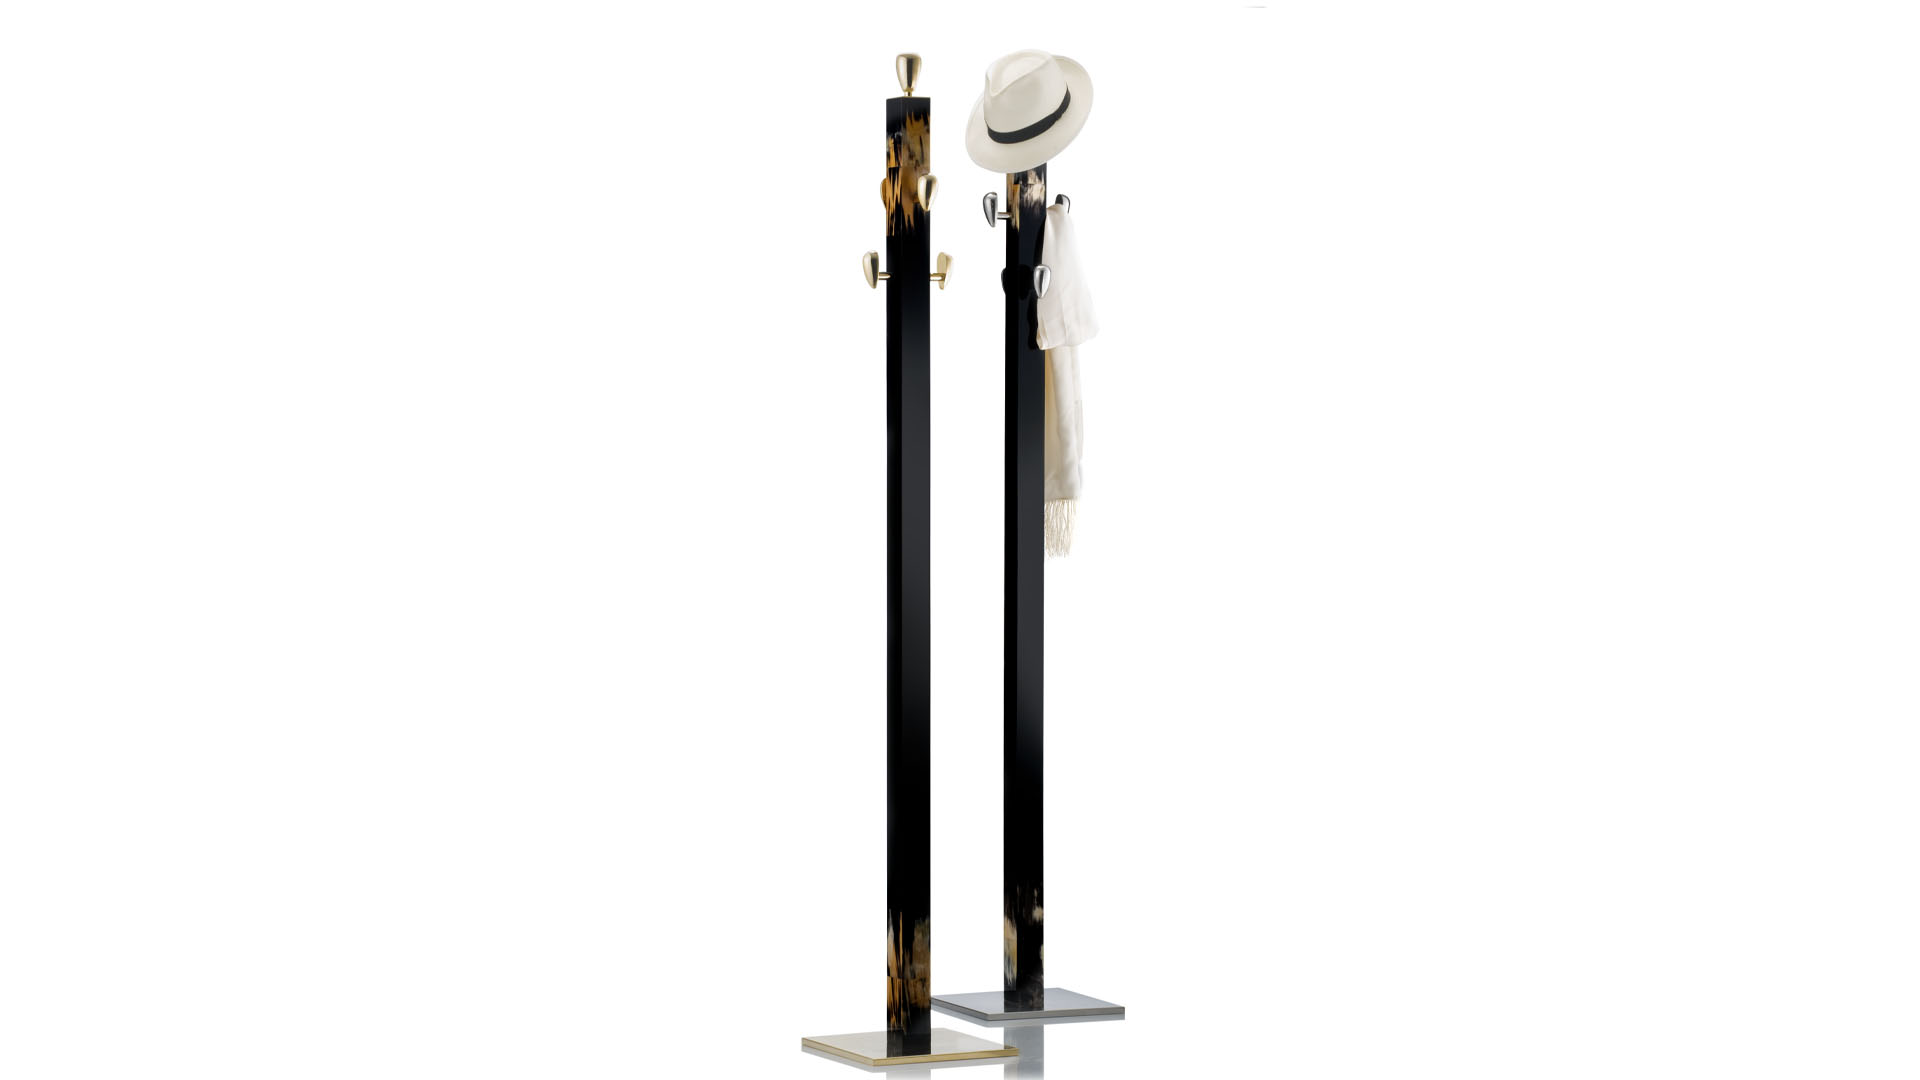 Coat stands and complementary furniture - Giglio coat stand in horn and glossy black lacquered wood - cover - Arcahorn